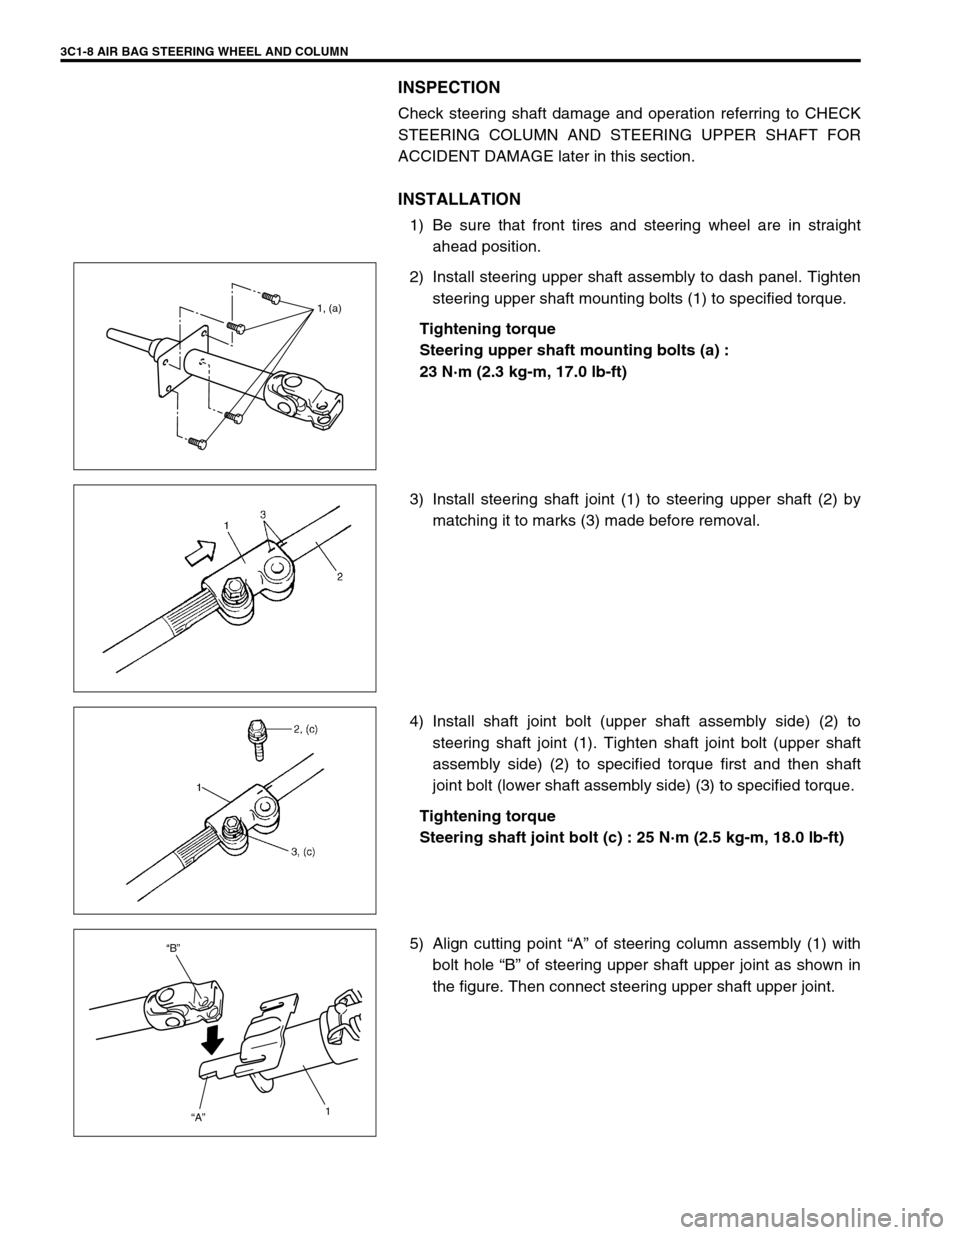 SUZUKI GRAND VITARA 1999 2.G Owners Manual 3C1-8 AIR BAG STEERING WHEEL AND COLUMN
INSPECTION
Check steering shaft damage and operation referring to CHECK
STEERING COLUMN AND STEERING UPPER SHAFT FOR
ACCIDENT DAMAGE later in this section.
INST